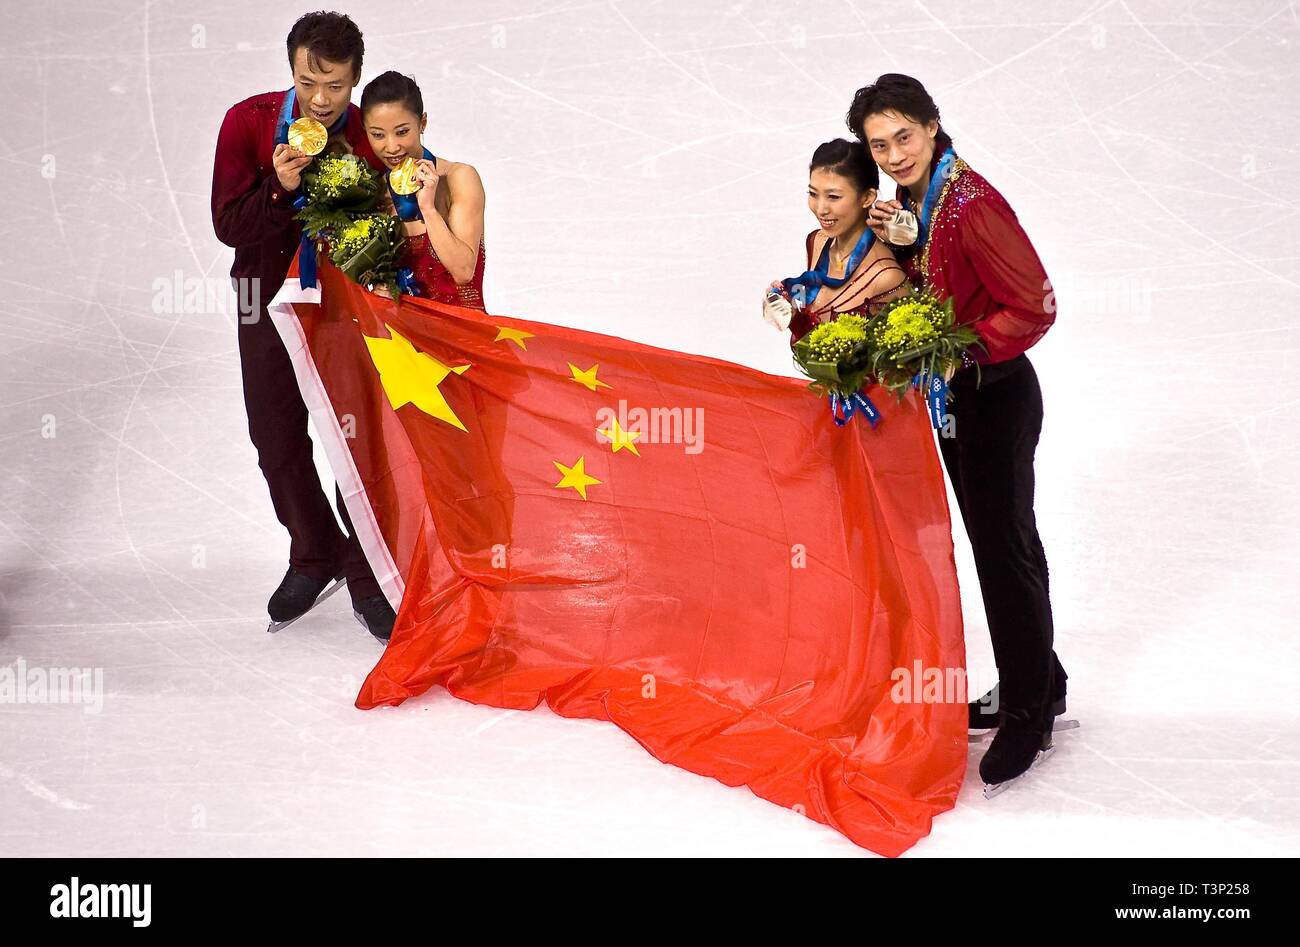 (190411) -- BEIJING, April 11, 2019 (Xinhua) -- File photo taken on Feb. 15, 2010 shows gold medalists Shen Xue (2nd L) and Zhao Hongbo (1st L) of China, compatriots and silver medalists Pang Qing (2nd R) and Tong Jian pose with the Chinese national flag during the medals ceremony for the figure skating pairs event at the 2010 Winter Olympics at the Pacific Coliseum in Vancouver, Canada. Shen Xue/Zhao Hongbo won the China's first Olympic gold medal in figure skating. From sending athletes to Helsinki Summer Olympic Games for the very first time in 1952 to winning the bid to host 2022 Winter Ol Stock Photo